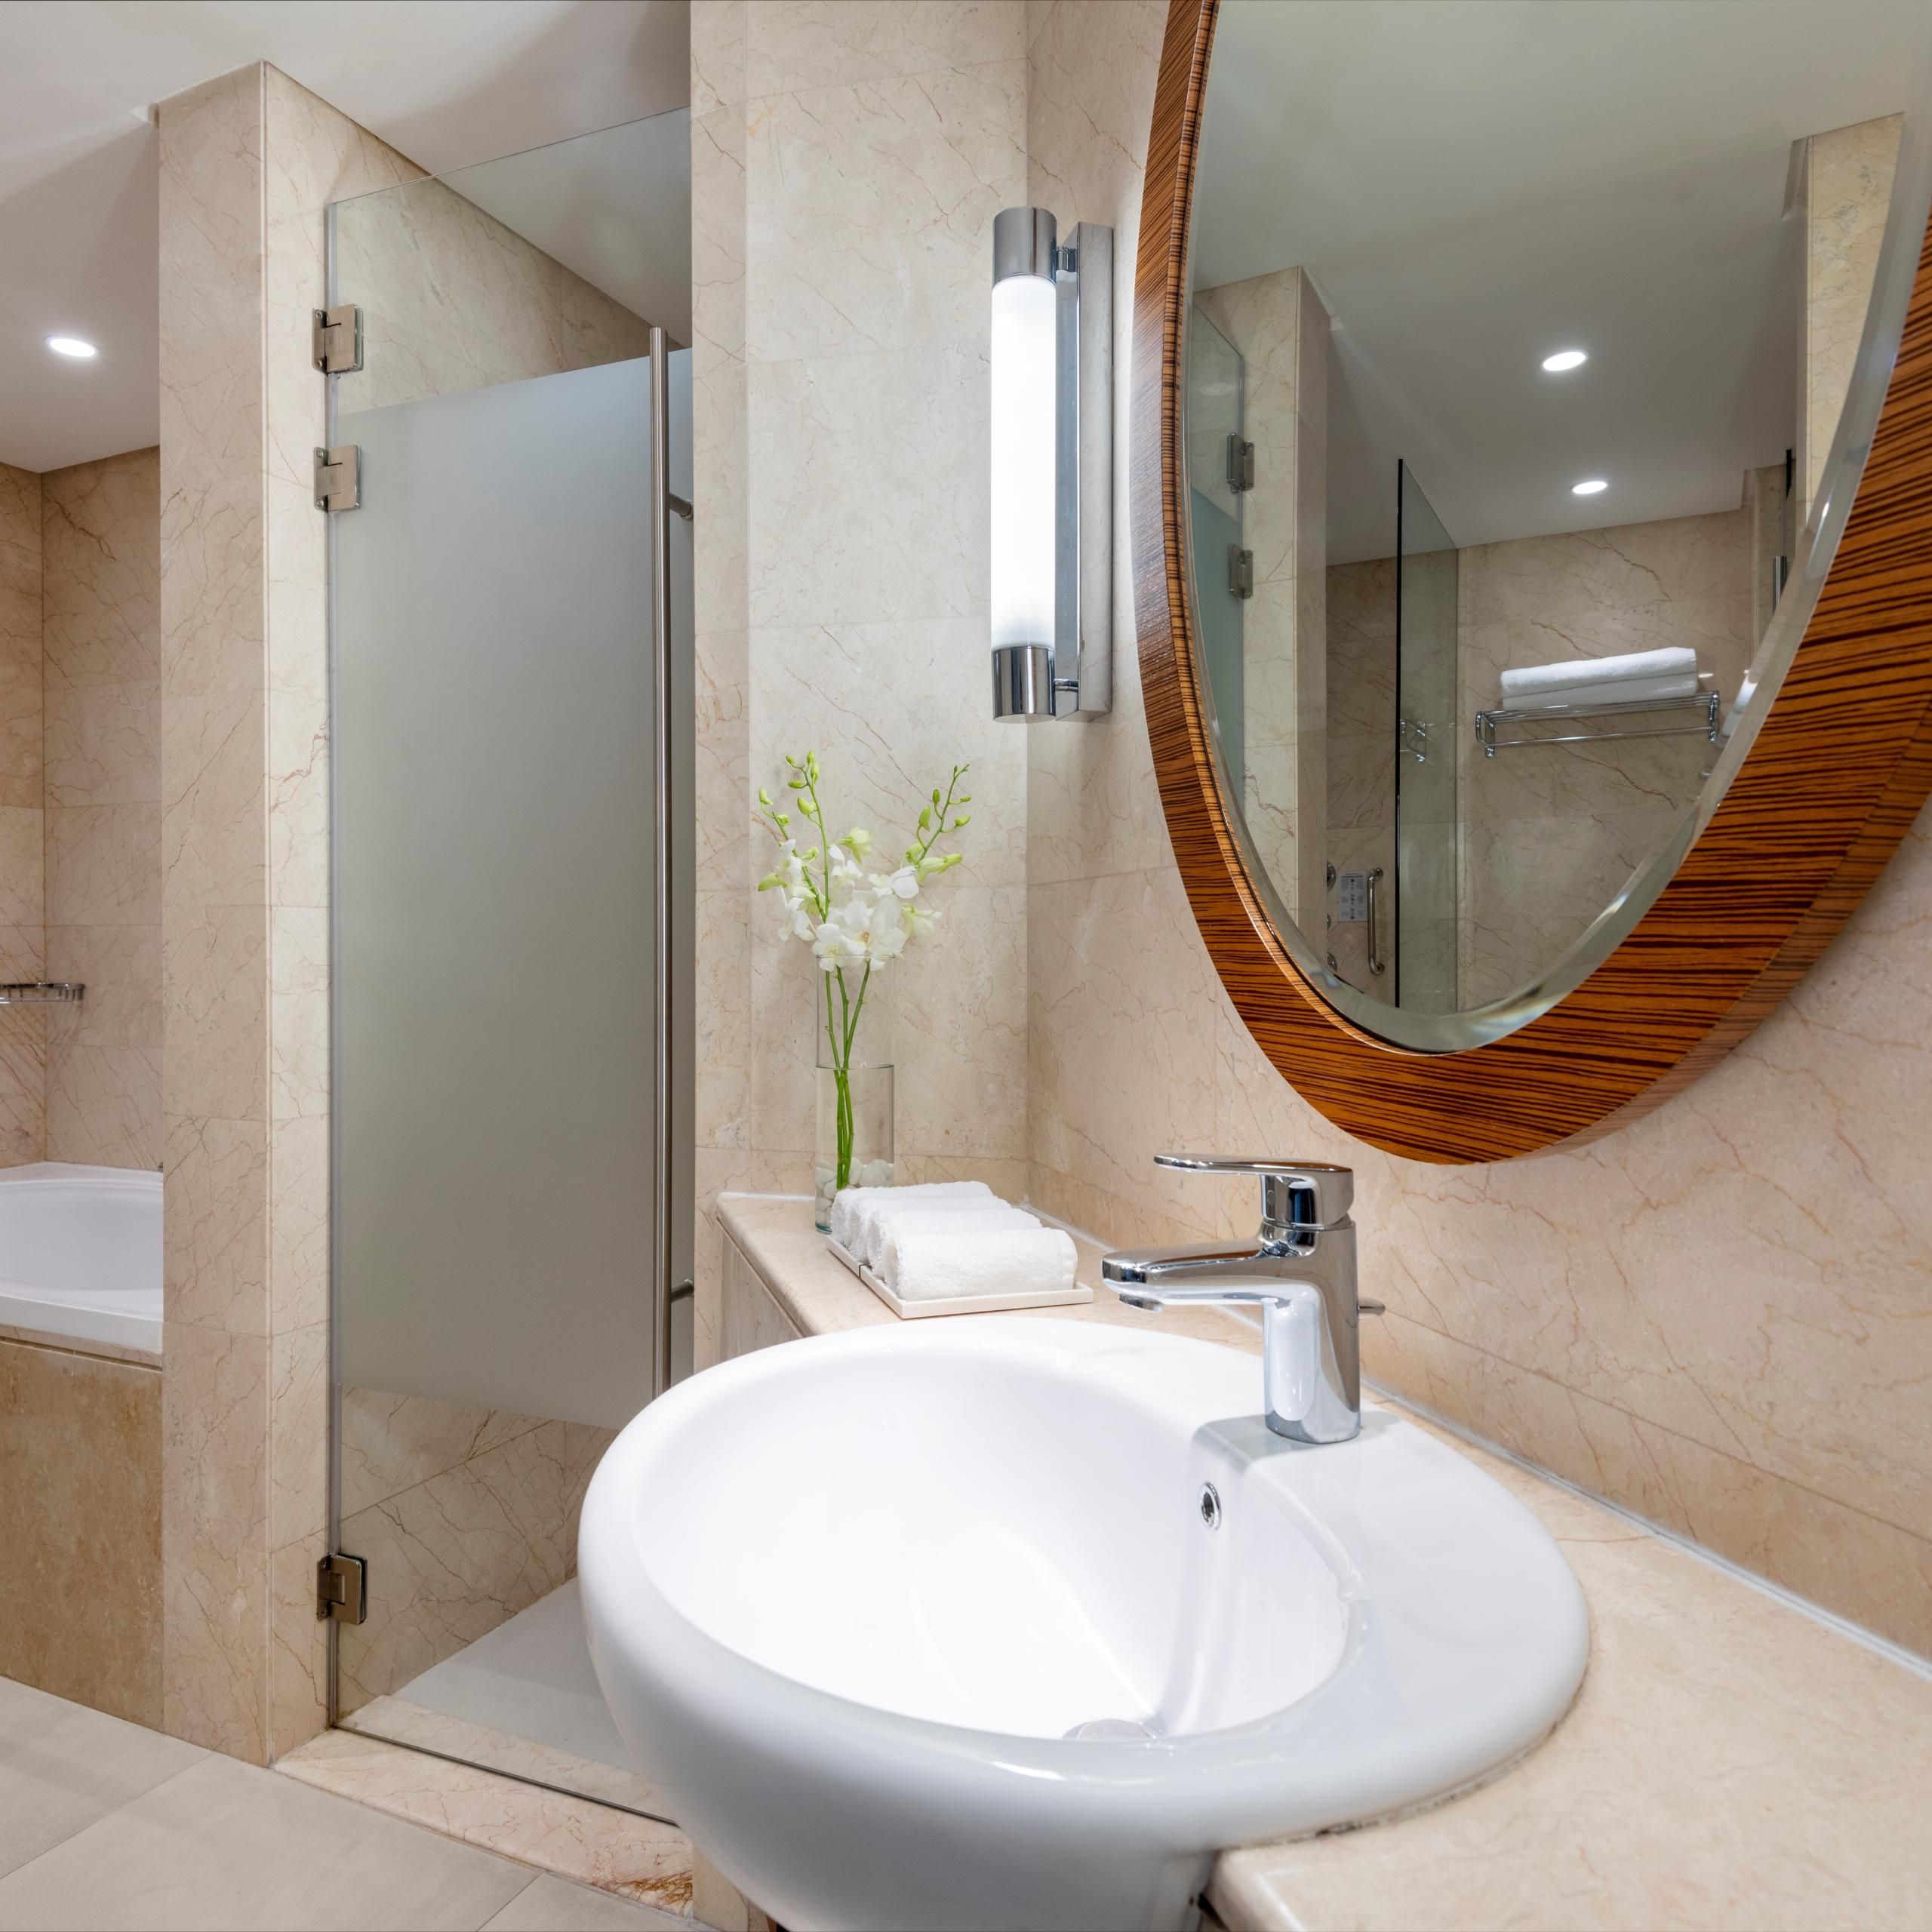 Presidential Suite bathroom features a shower room and a bathtub